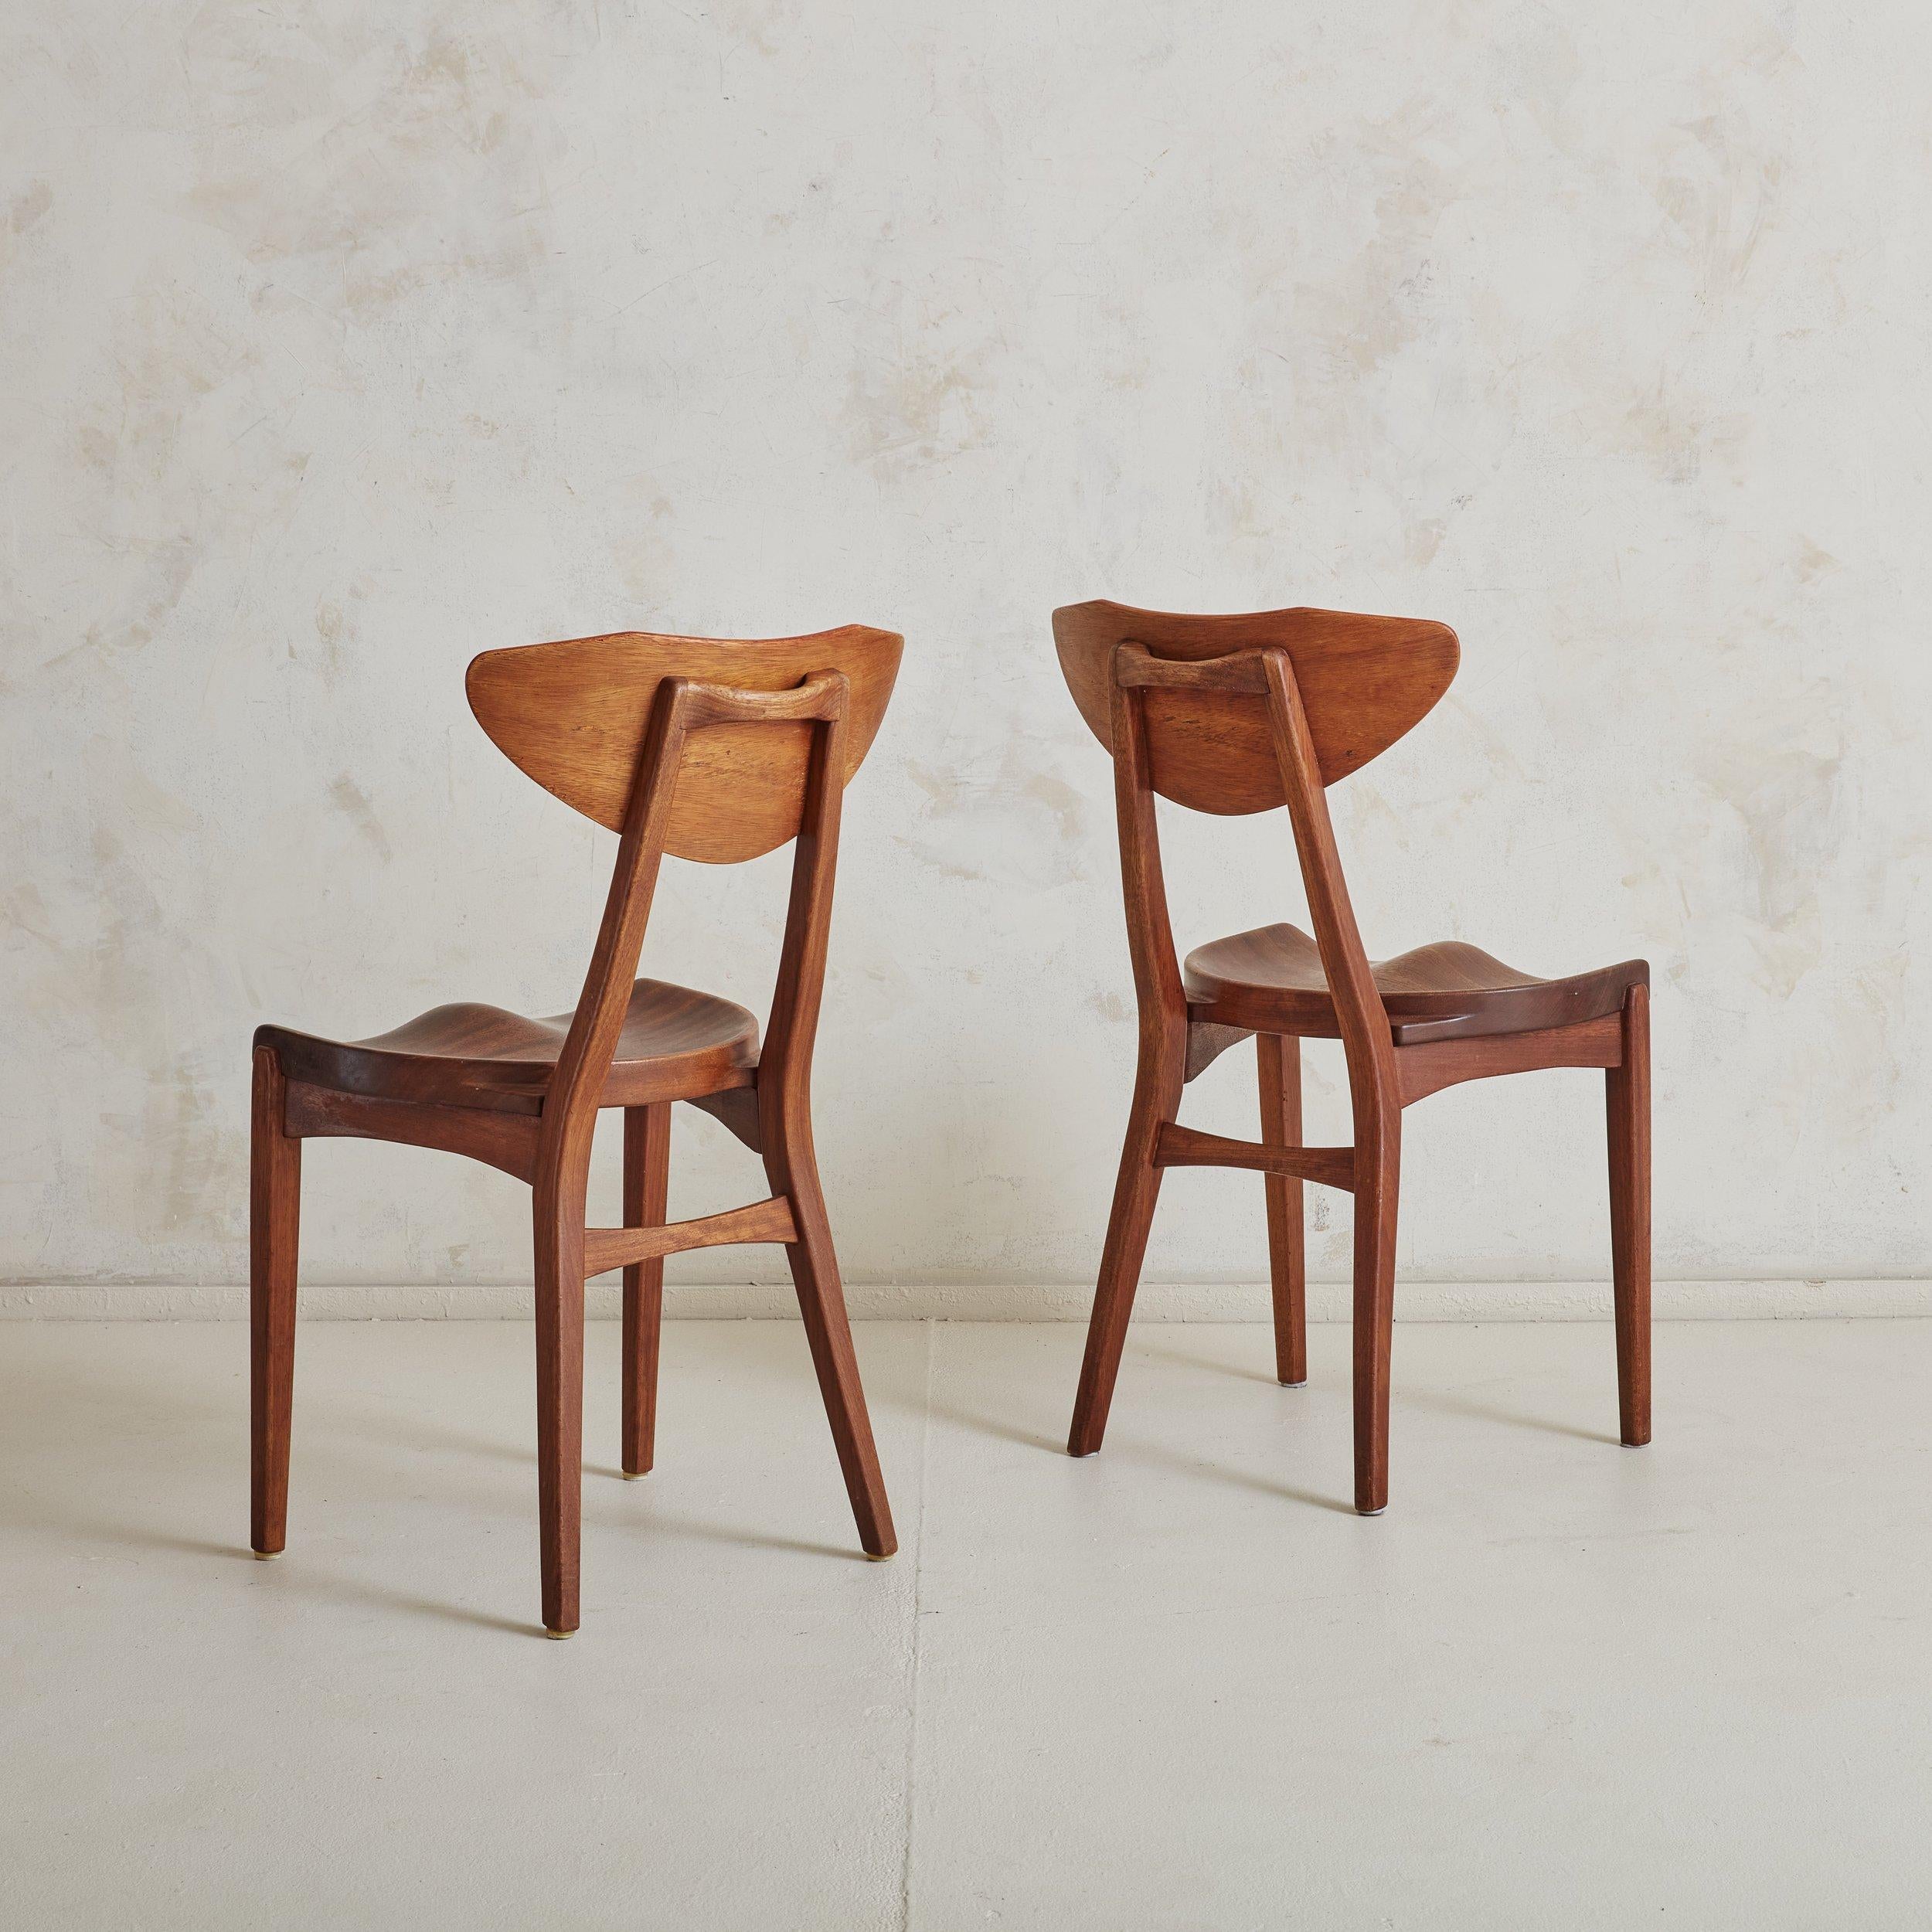 A pair of Danish Modern dining chairs designed by Richard Jensen & Kjærulff Rasmussen featuring sculptural frames constructed of rich, dark brown mahogany with stunning graining and natural patina. Carved seats catch the eye while also providing